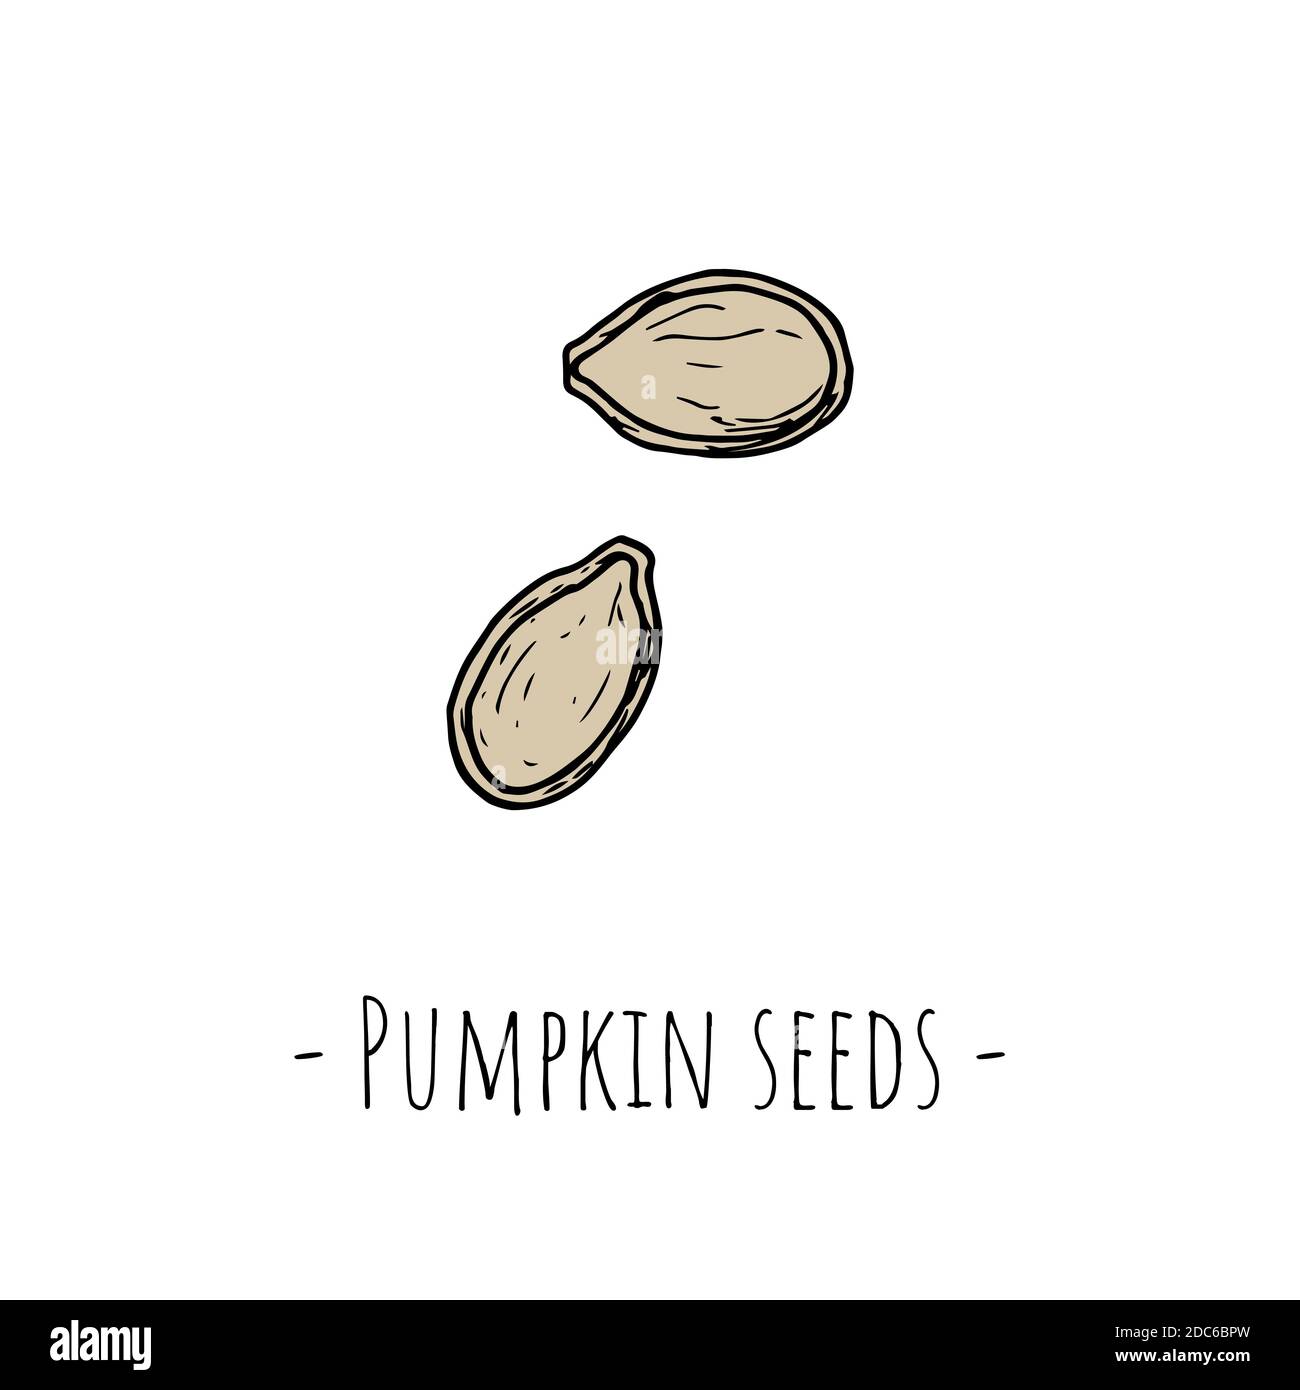 Pumpkin seeds. Isolated objects on a white background. Handdrawn style